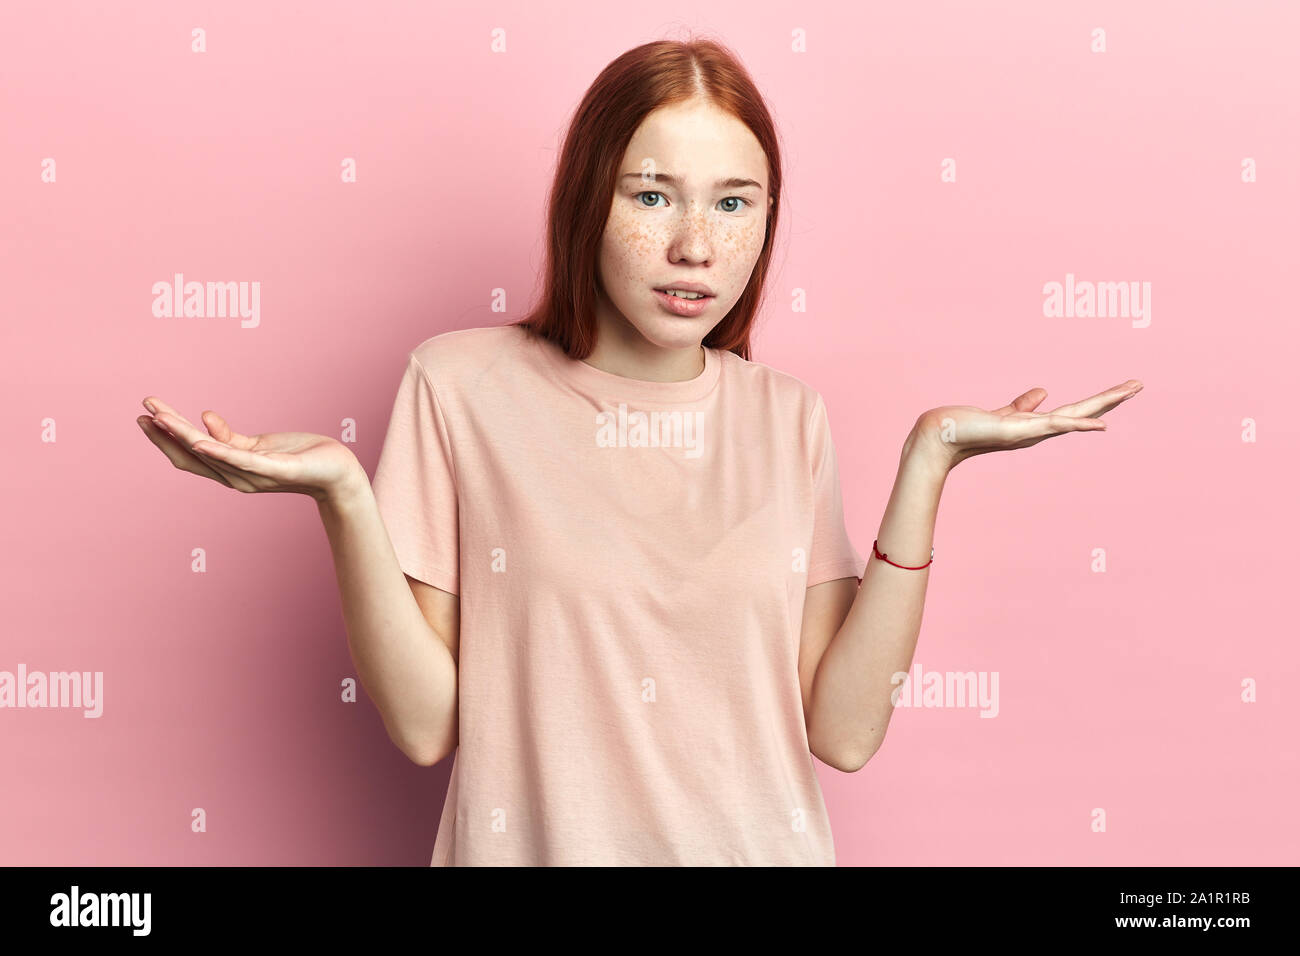 serious woman shrugs her shoulders, student doesn't know how to pass exams. close up portrait, isolated pink background, studio shot. Stock Photo